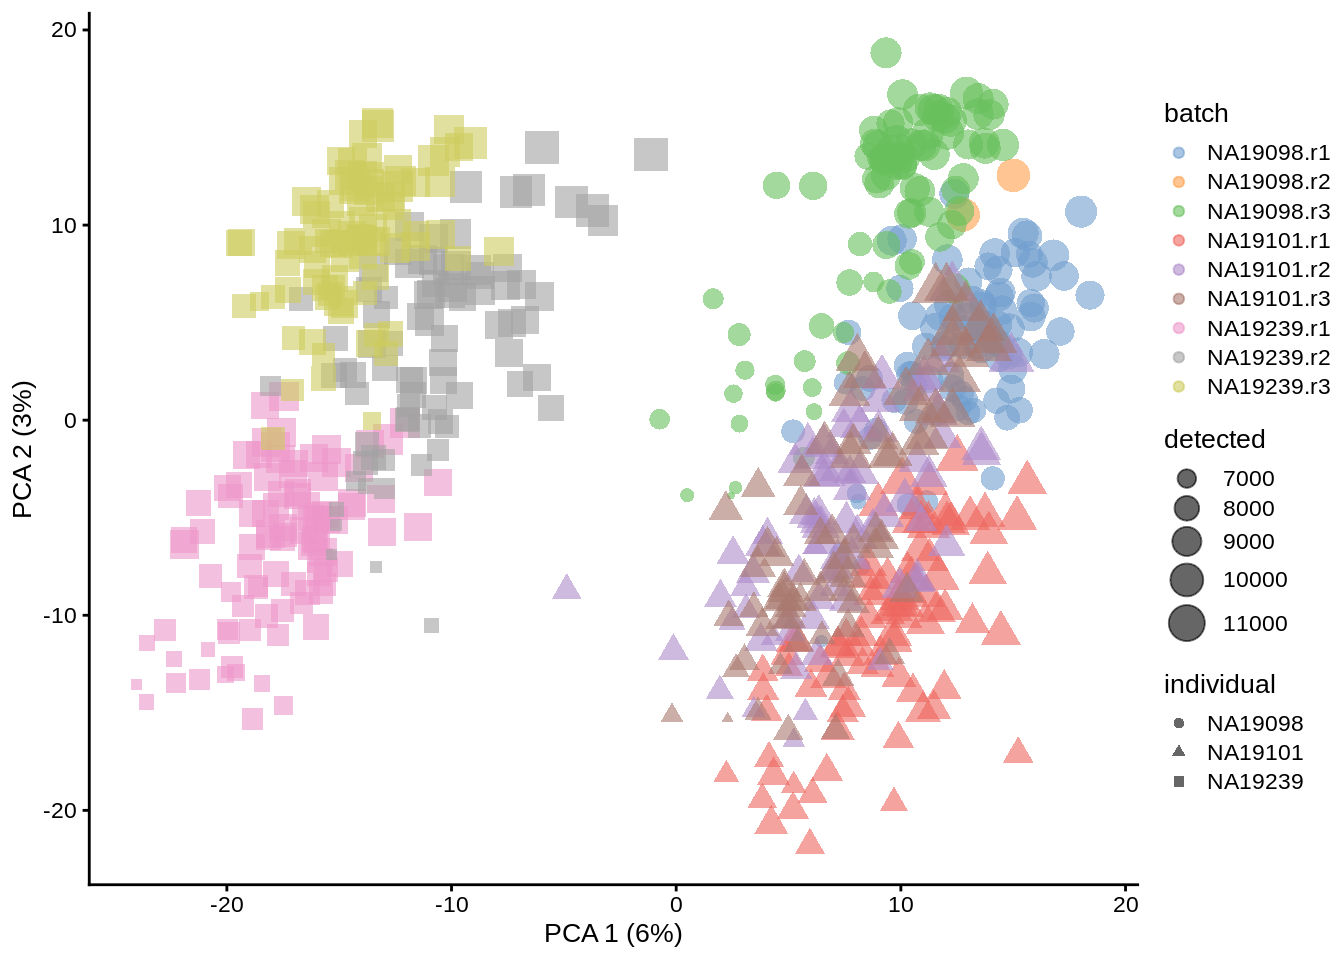 PCA plot of the tung data after CPM normalisation